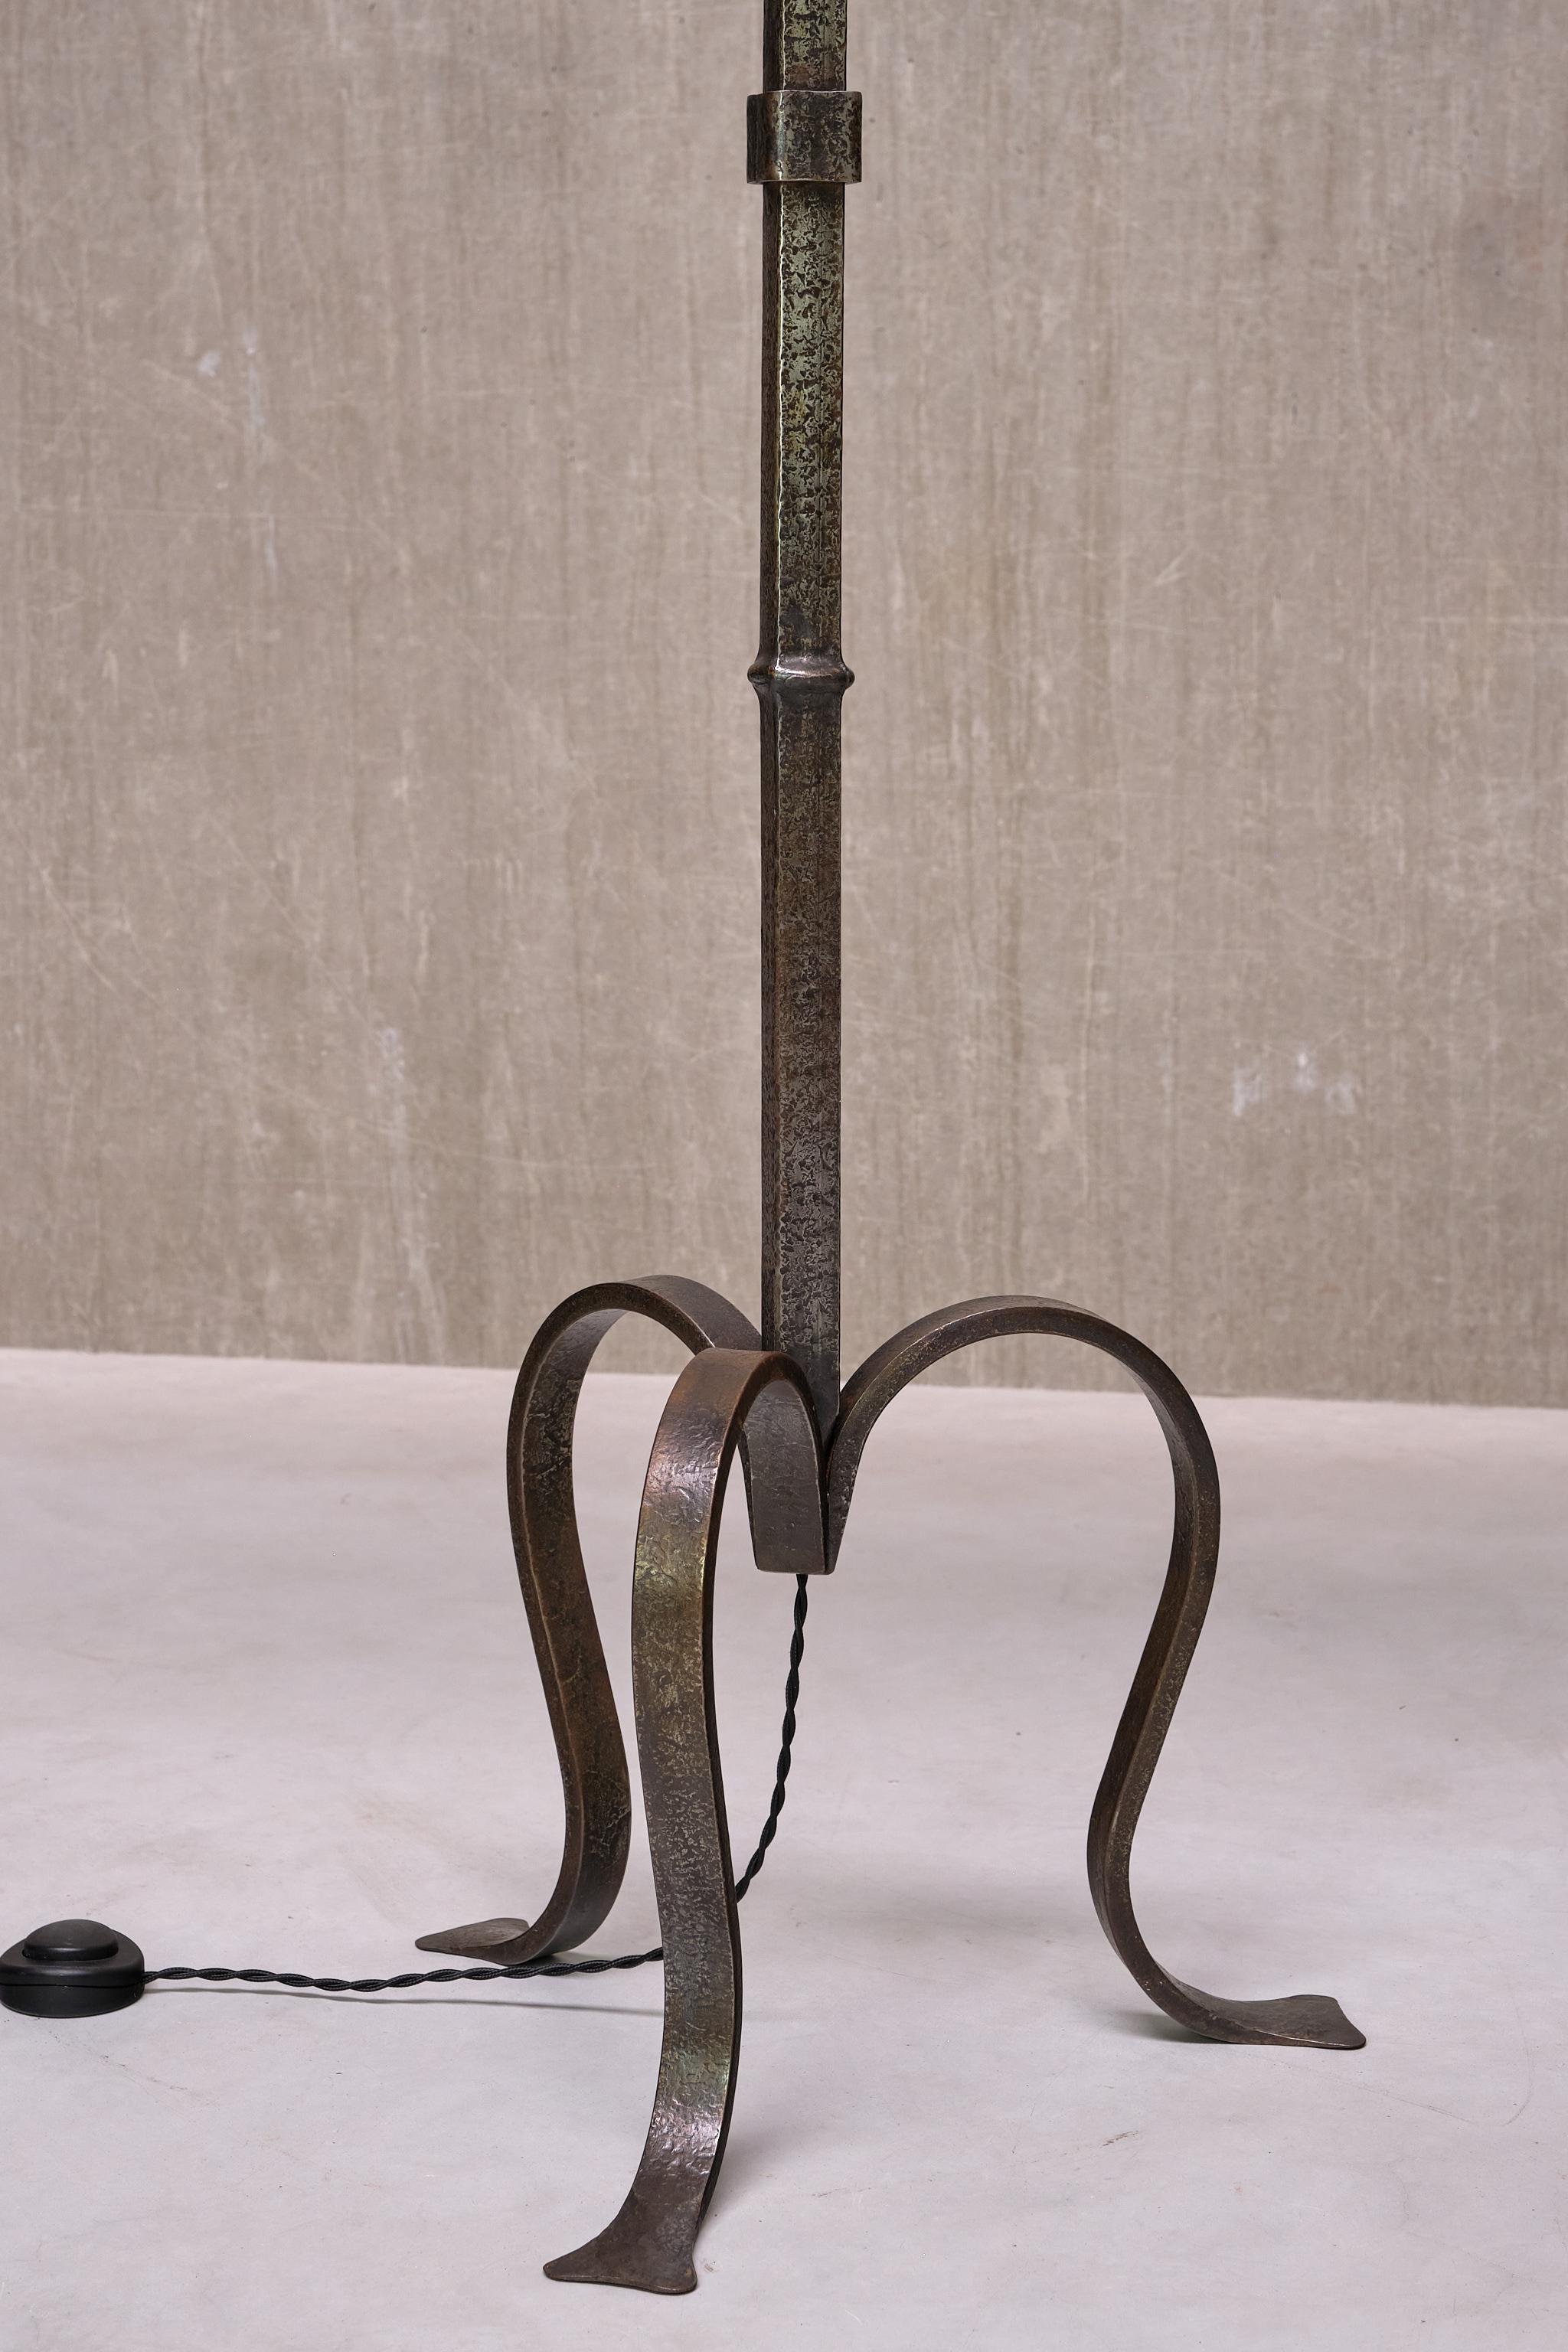 Sculptural French Modern Three Legged Floor Lamp in Wrought Iron, 1950s For Sale 2